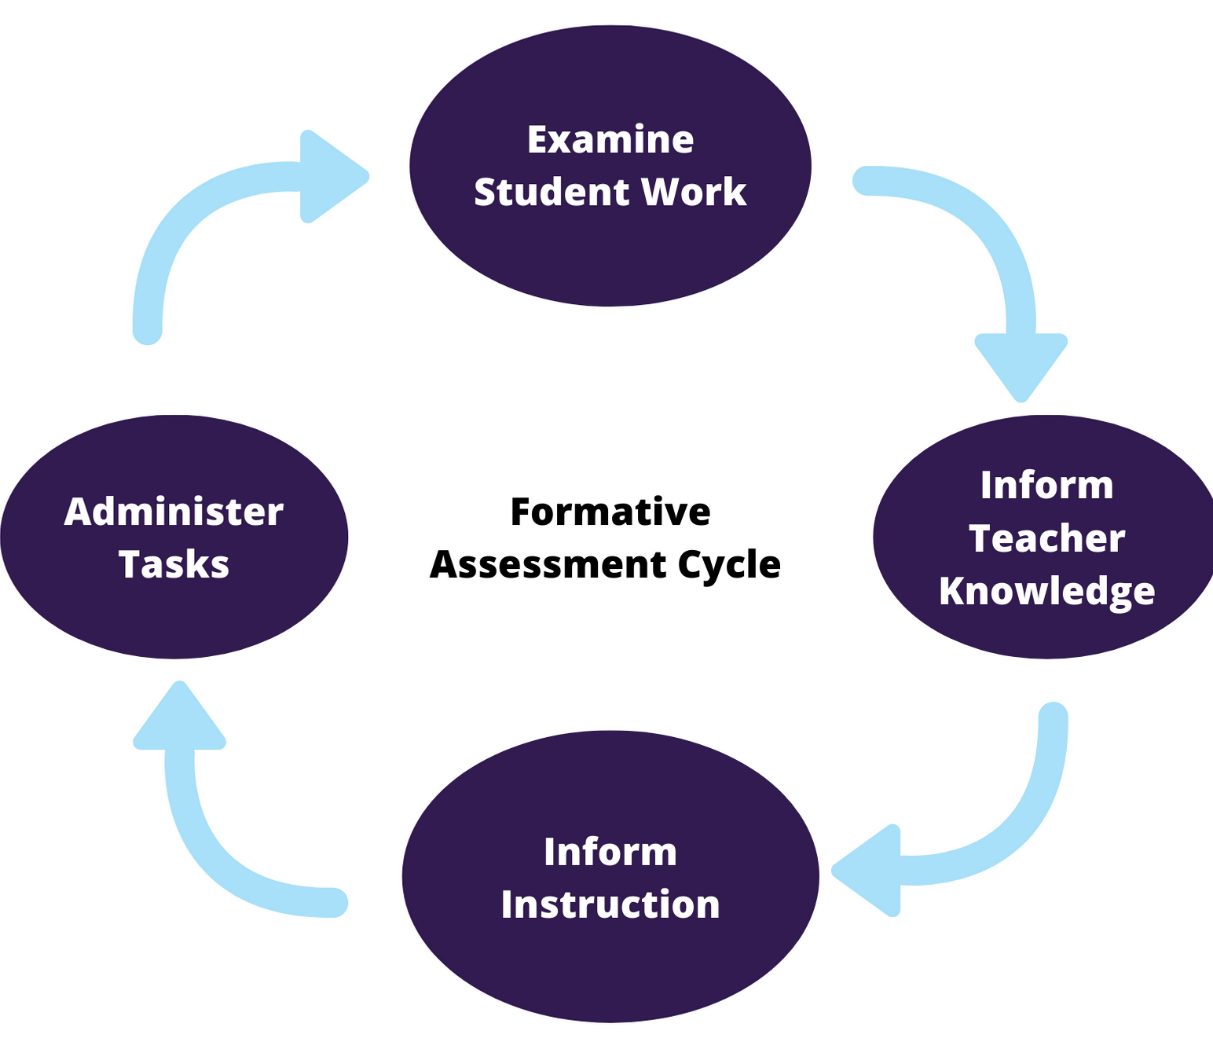 A diagram illustrating how a formative assessment cycle begins with examining student work, which informs teach knowledge, which informs instruction, which leads to administering tasks and the cycle repeats. 